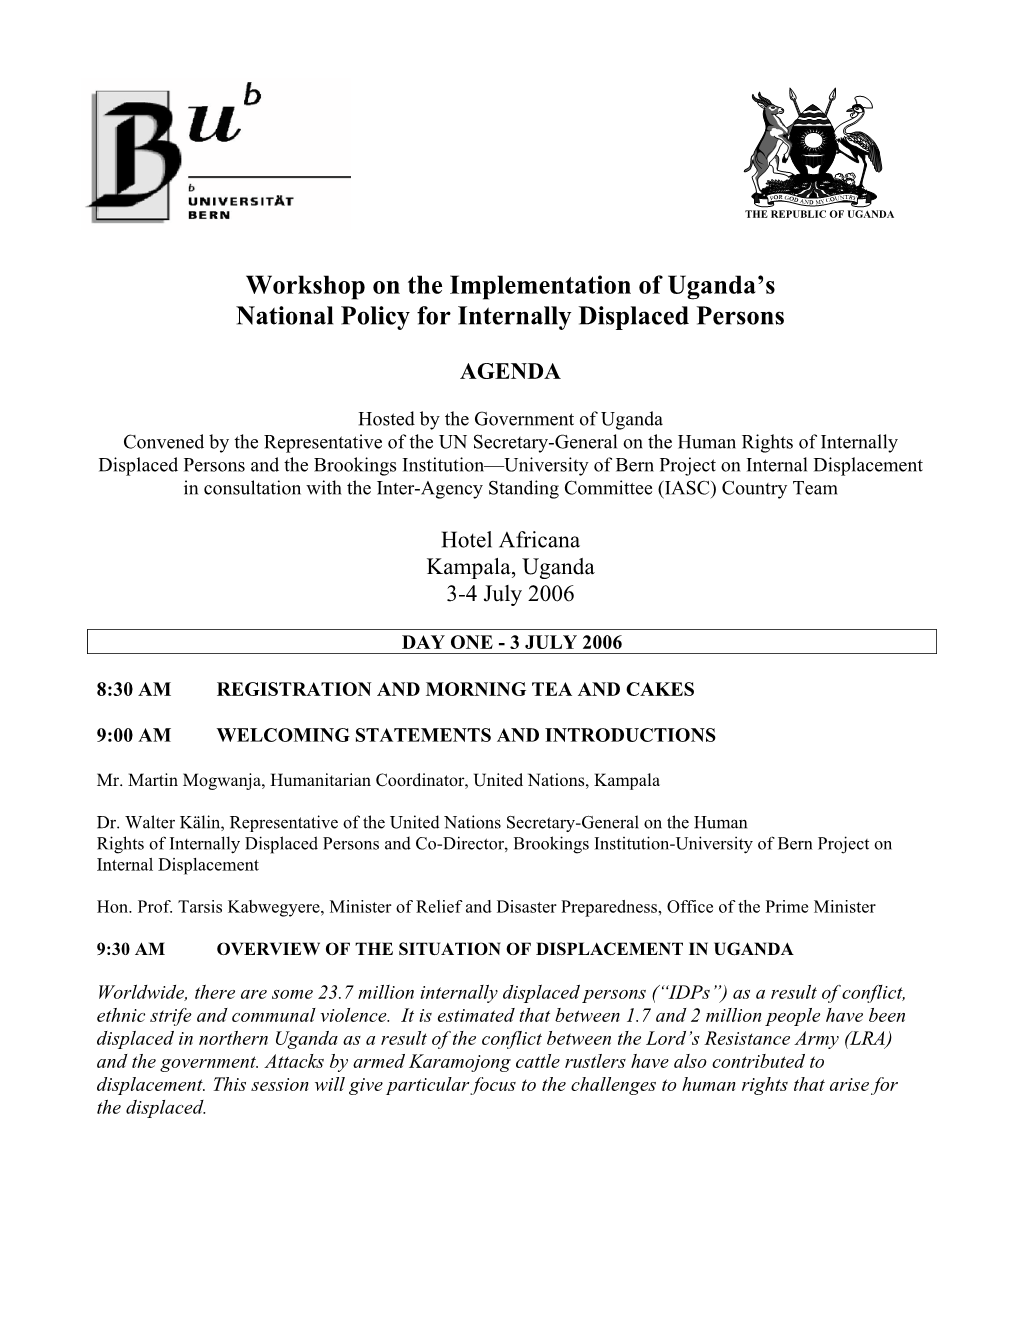 Workshop on the Implementation of Uganda's National Policy For